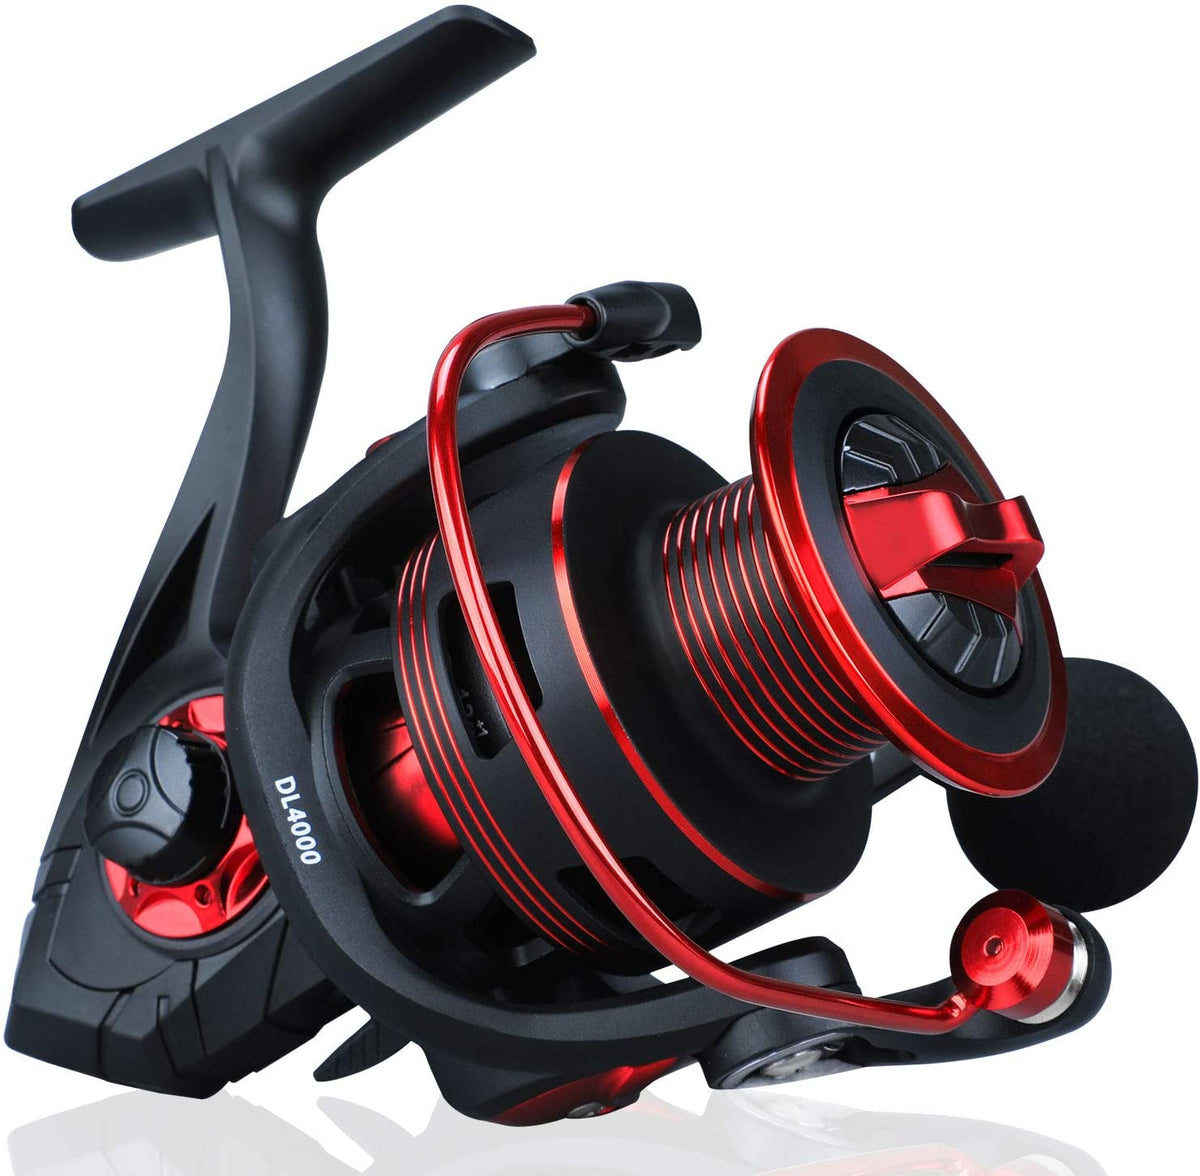  SHTONE Smooth Operation Durable Spinning Reels 5.5:1